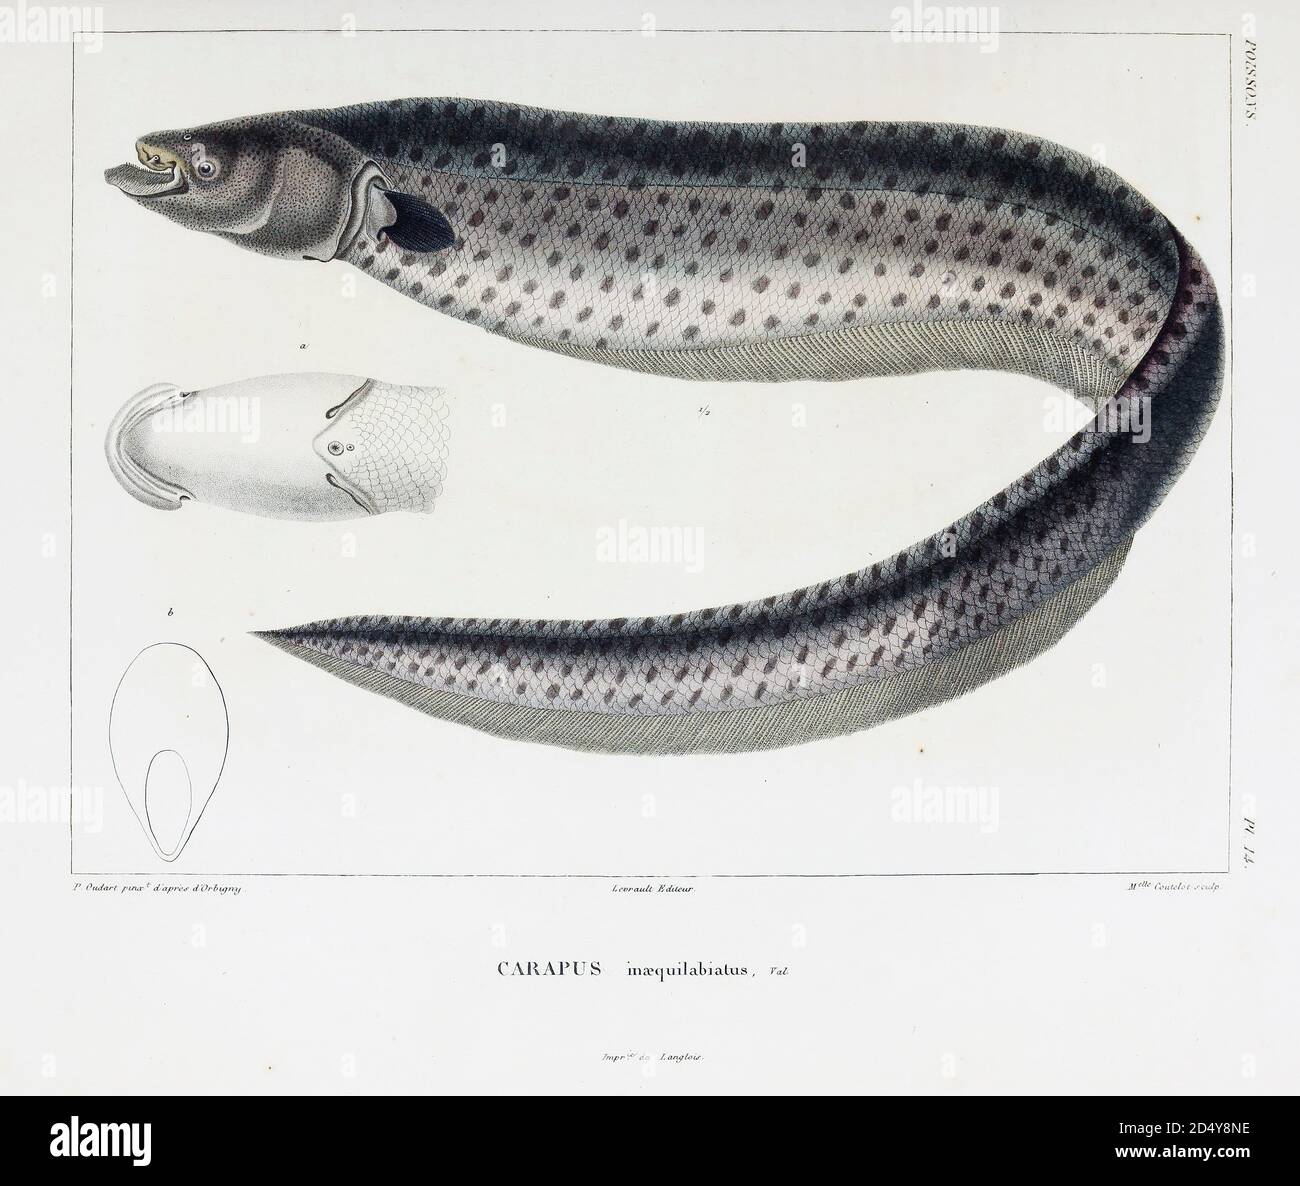 Carapus inaequilabiatus electric fish hand coloured sketch From the book 'Voyage dans l'Amérique Méridionale' [Journey to South America: (Brazil, the eastern republic of Uruguay, the Argentine Republic, Patagonia, the republic of Chile, the republic of Bolivia, the republic of Peru), executed during the years 1826 - 1833] Volume 5 Part 1 By: Orbigny, Alcide Dessalines d', d'Orbigny, 1802-1857; Montagne, Jean François Camille, 1784-1866; Martius, Karl Friedrich Philipp von, 1794-1868 Published Paris :Chez Pitois-Levrault. Publishes in Paris in 1847 Stock Photo